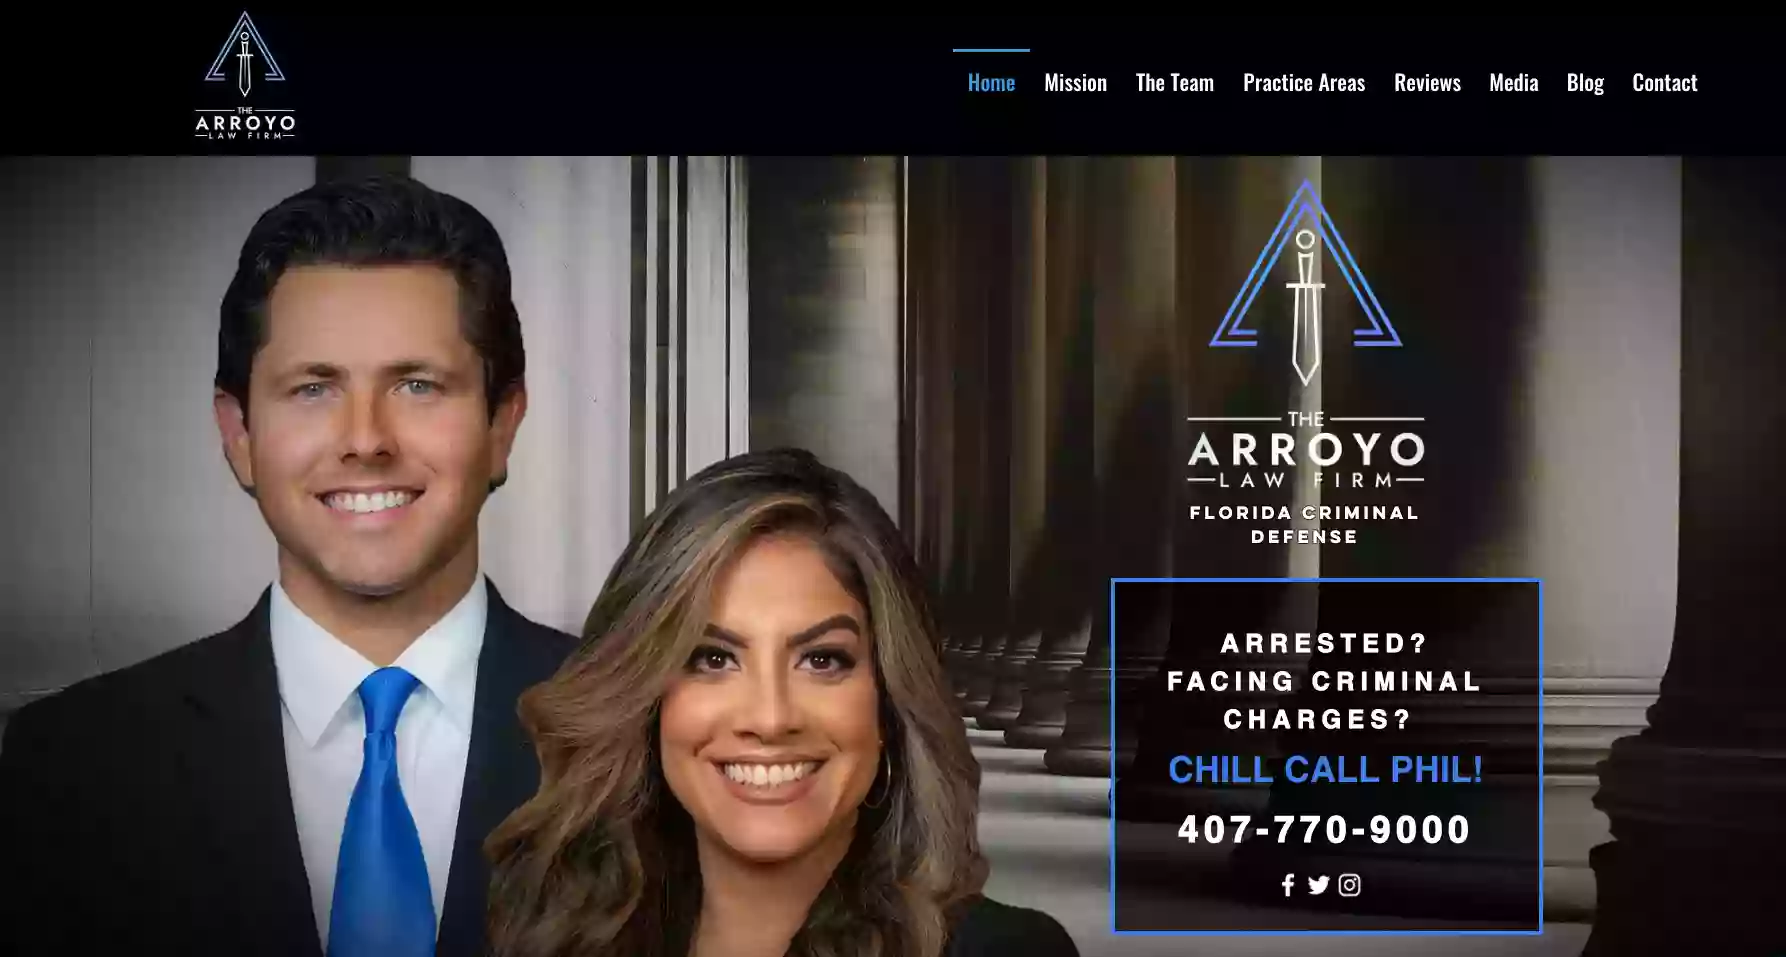 The Arroyo Law Firm